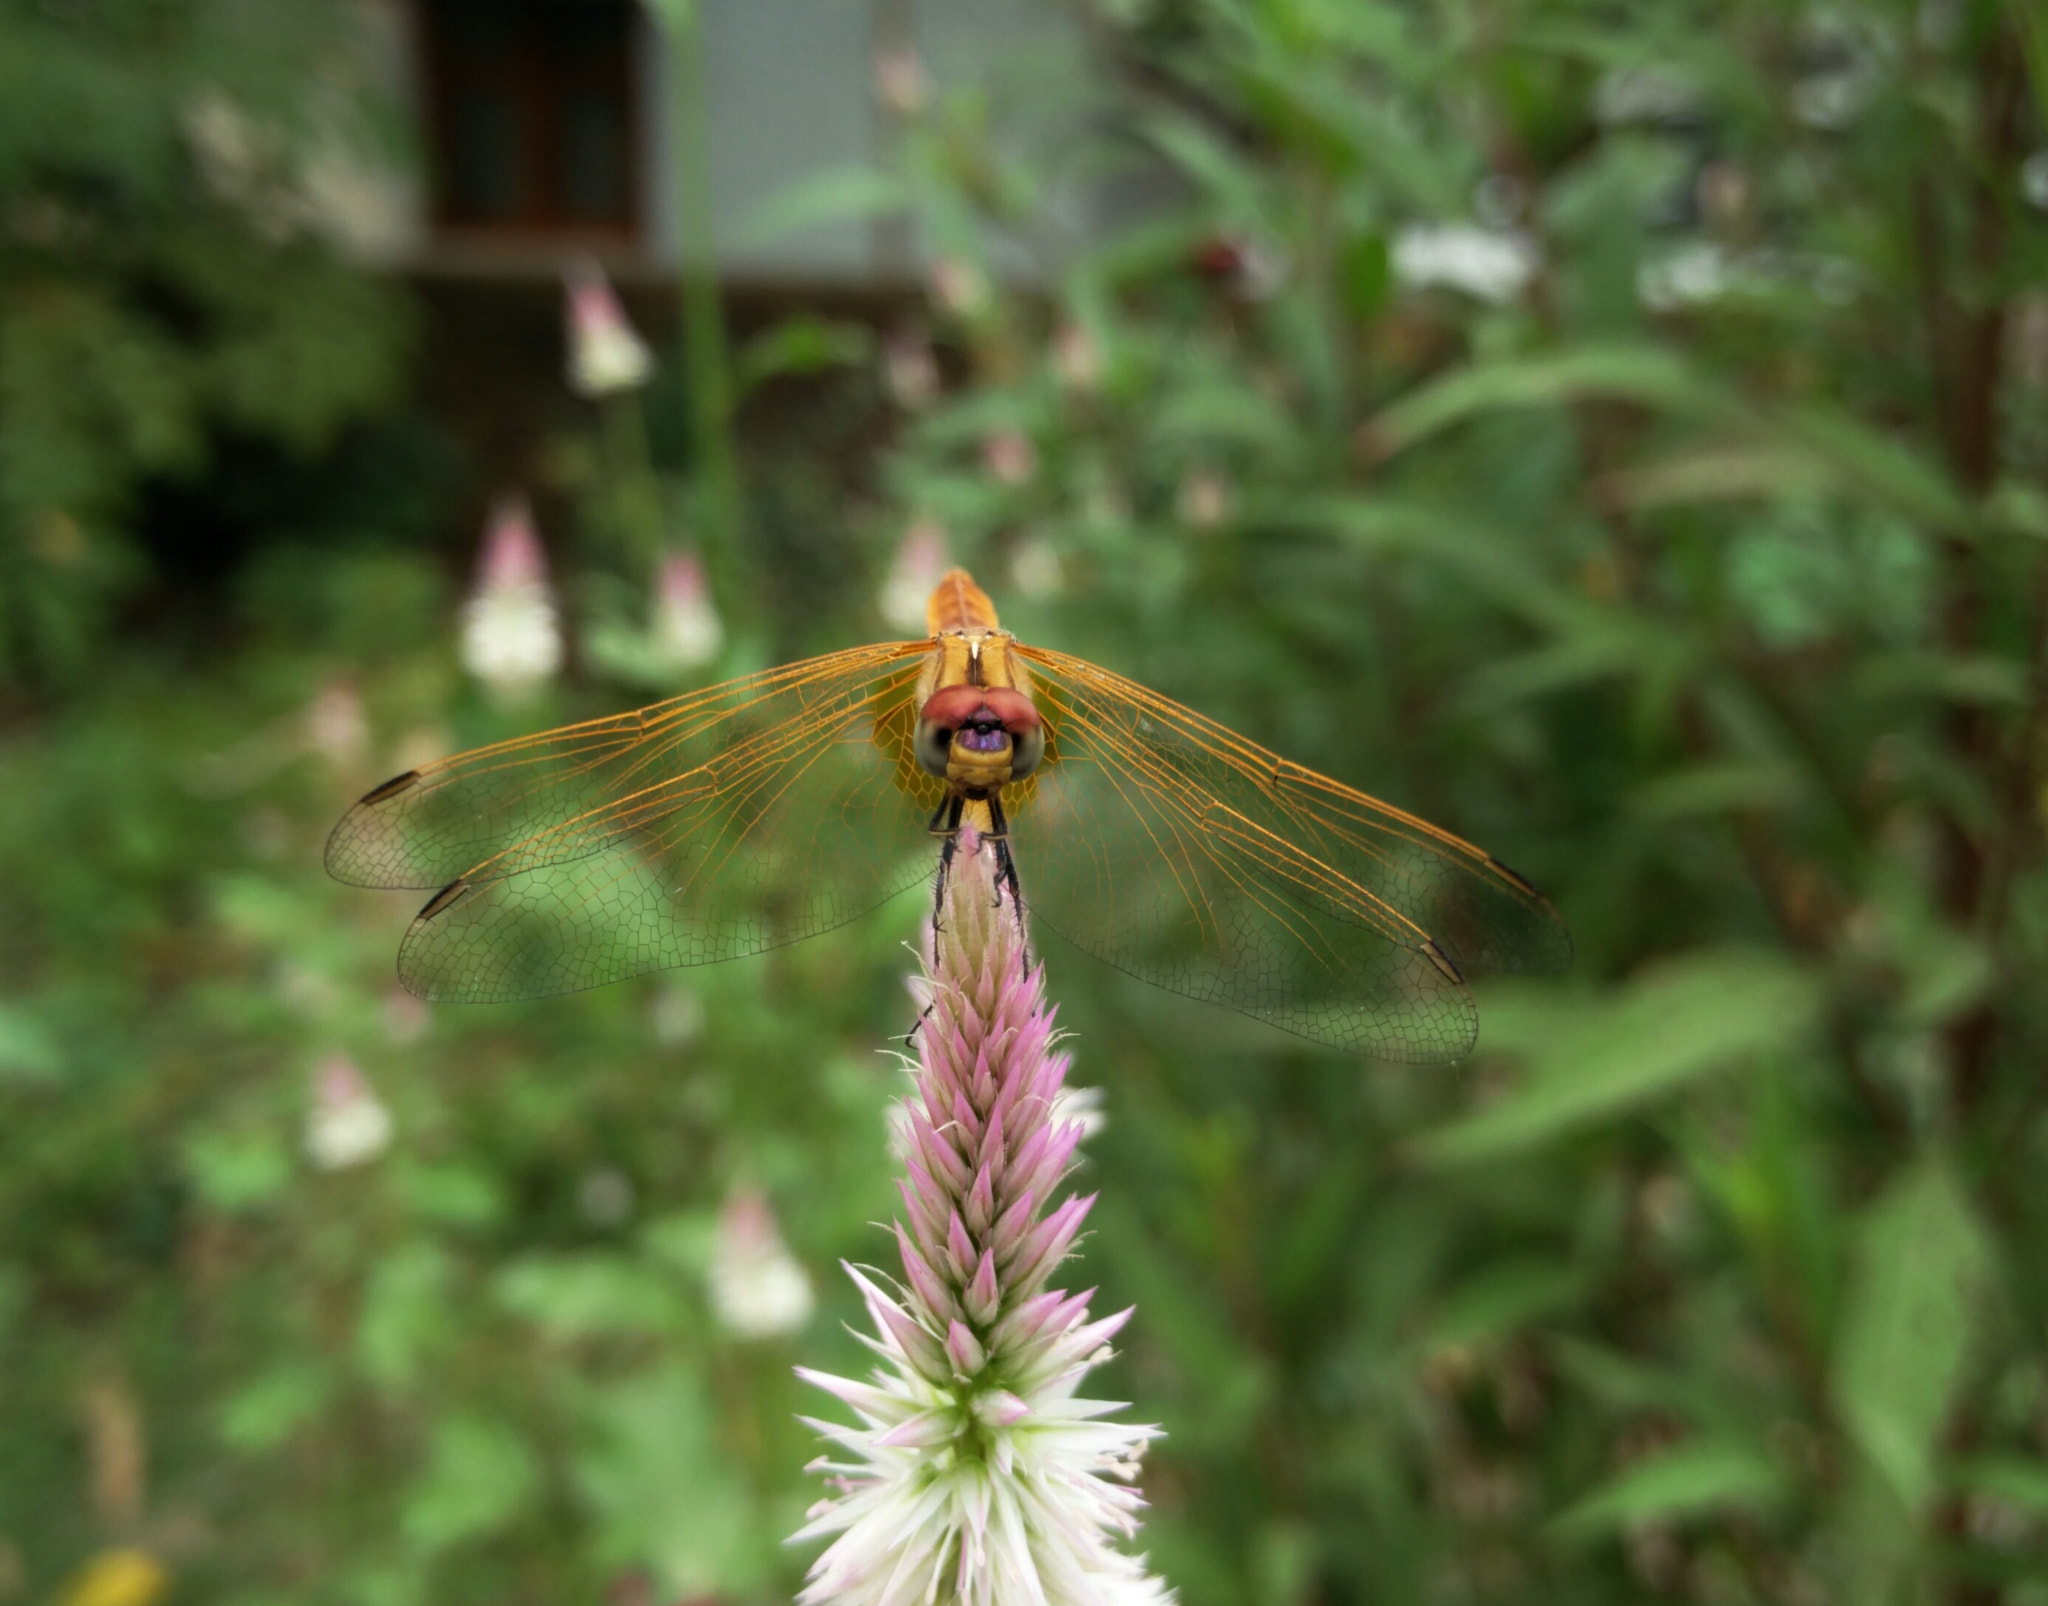 OnePlus 2 sample photo. Dragonfly photography